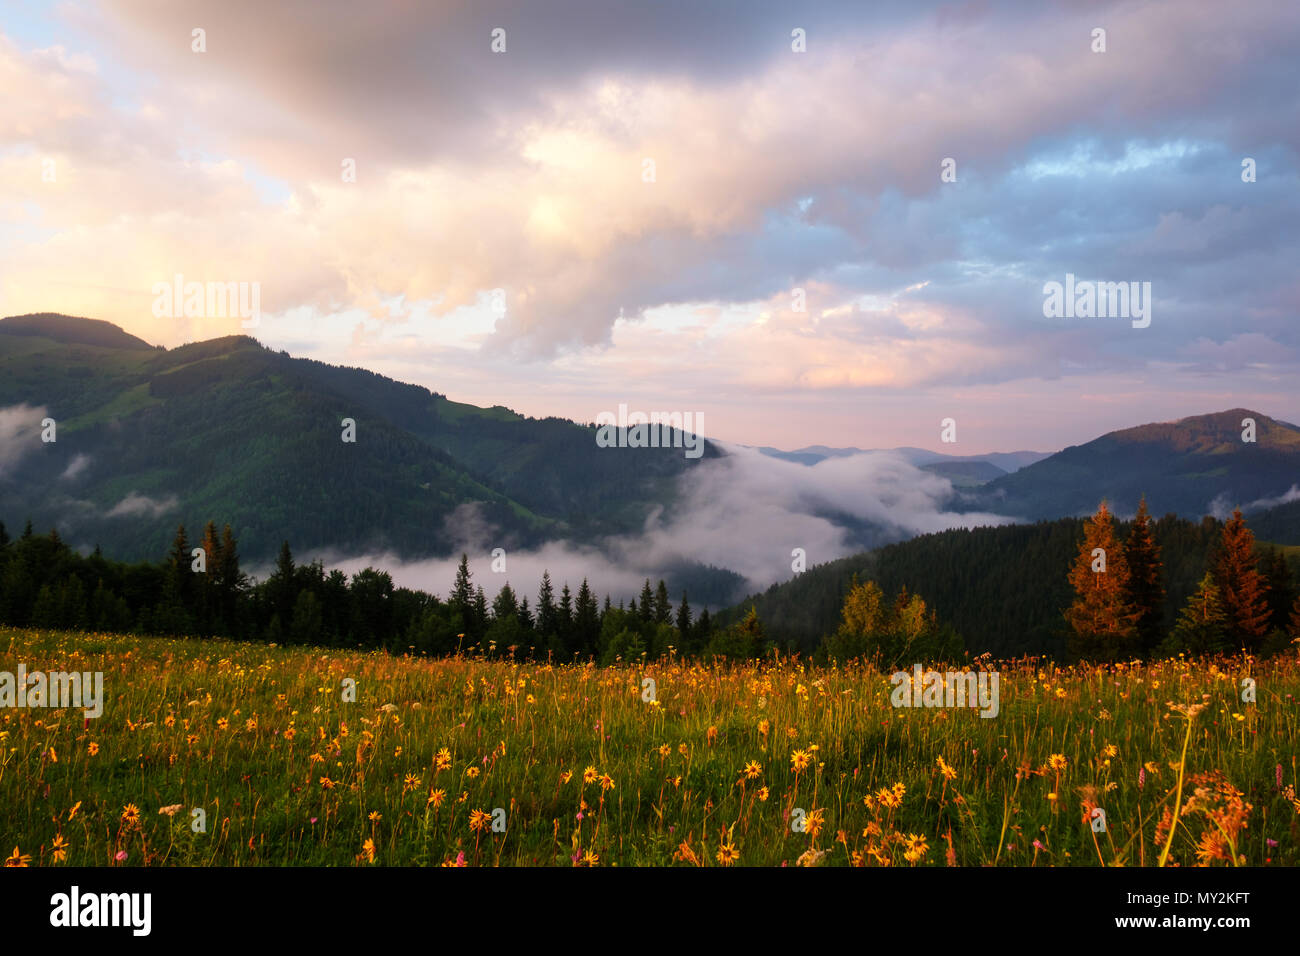 Mountain valley during sunrise Stock Photo